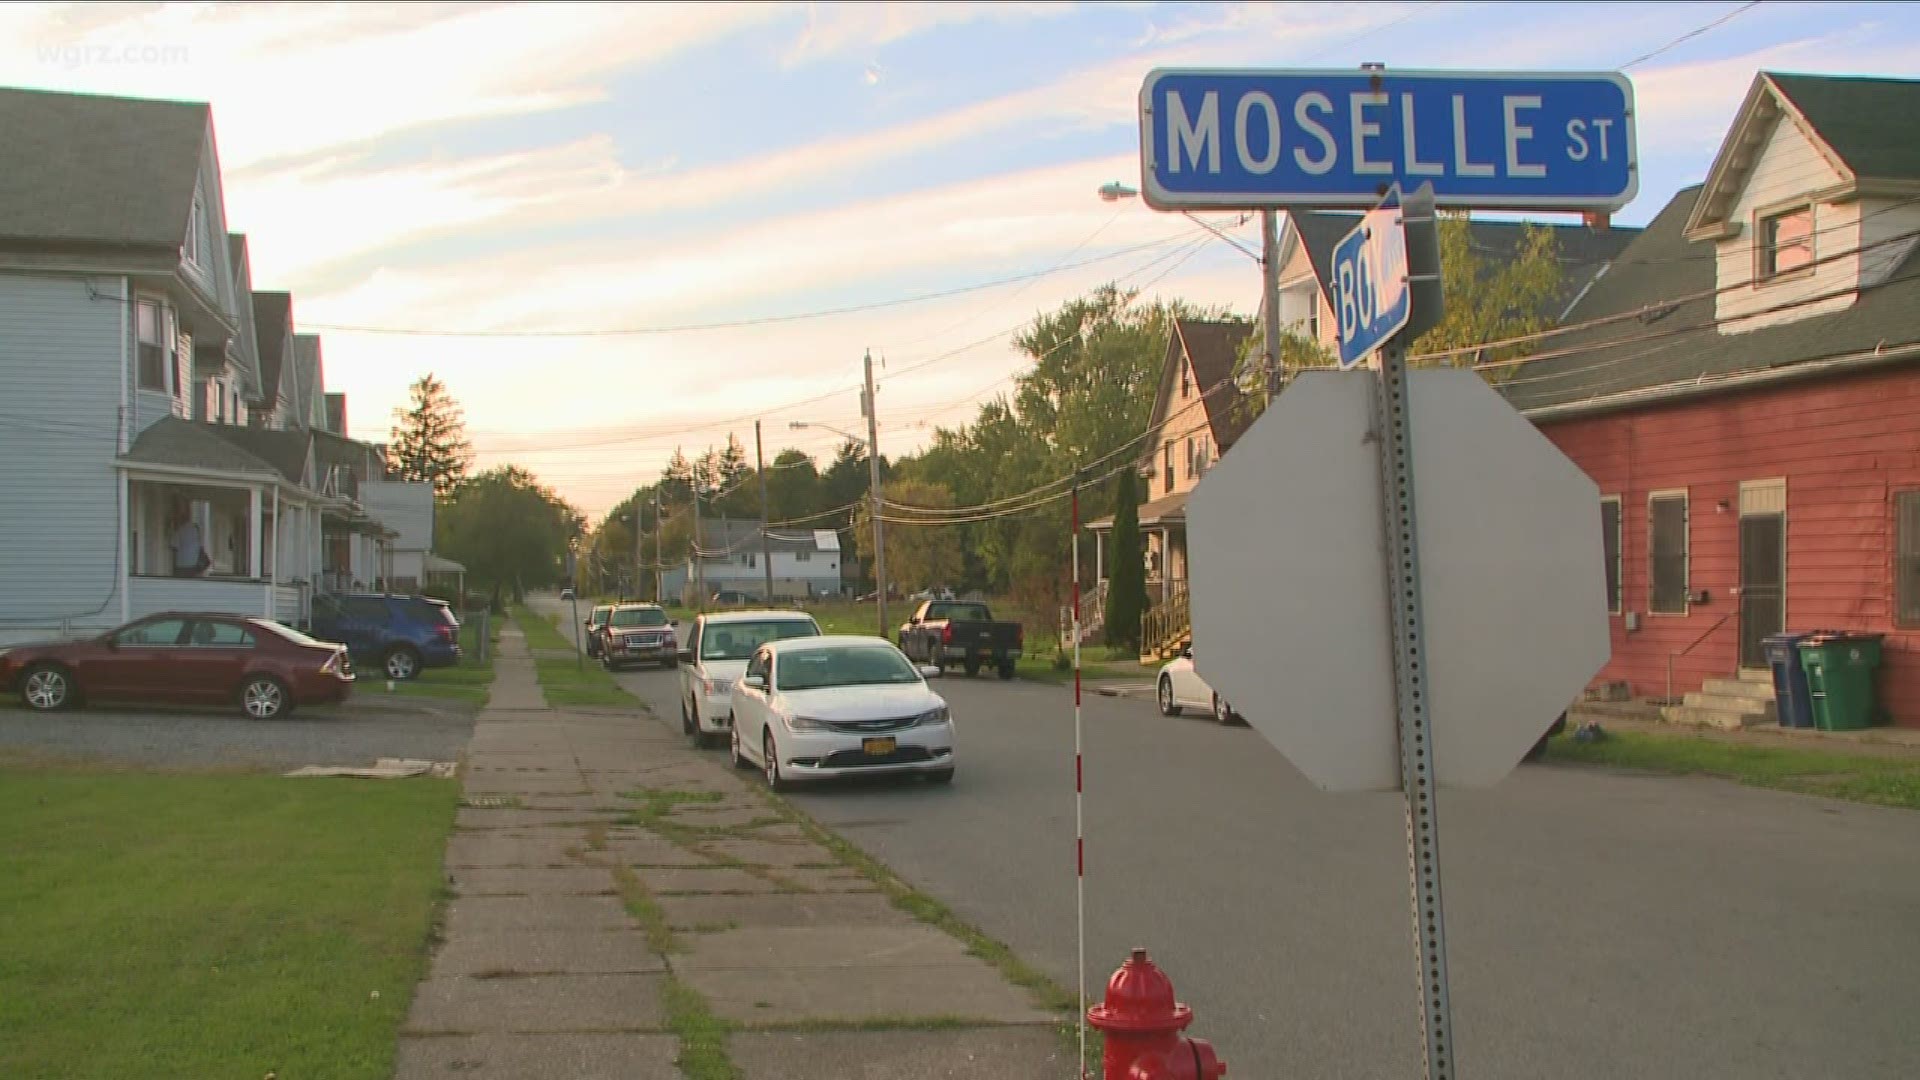 Buffalo Police say a body was found this afternoon on the city's East Side. The body was found inside a home on Box Avenue, between Kehr and Moselle.